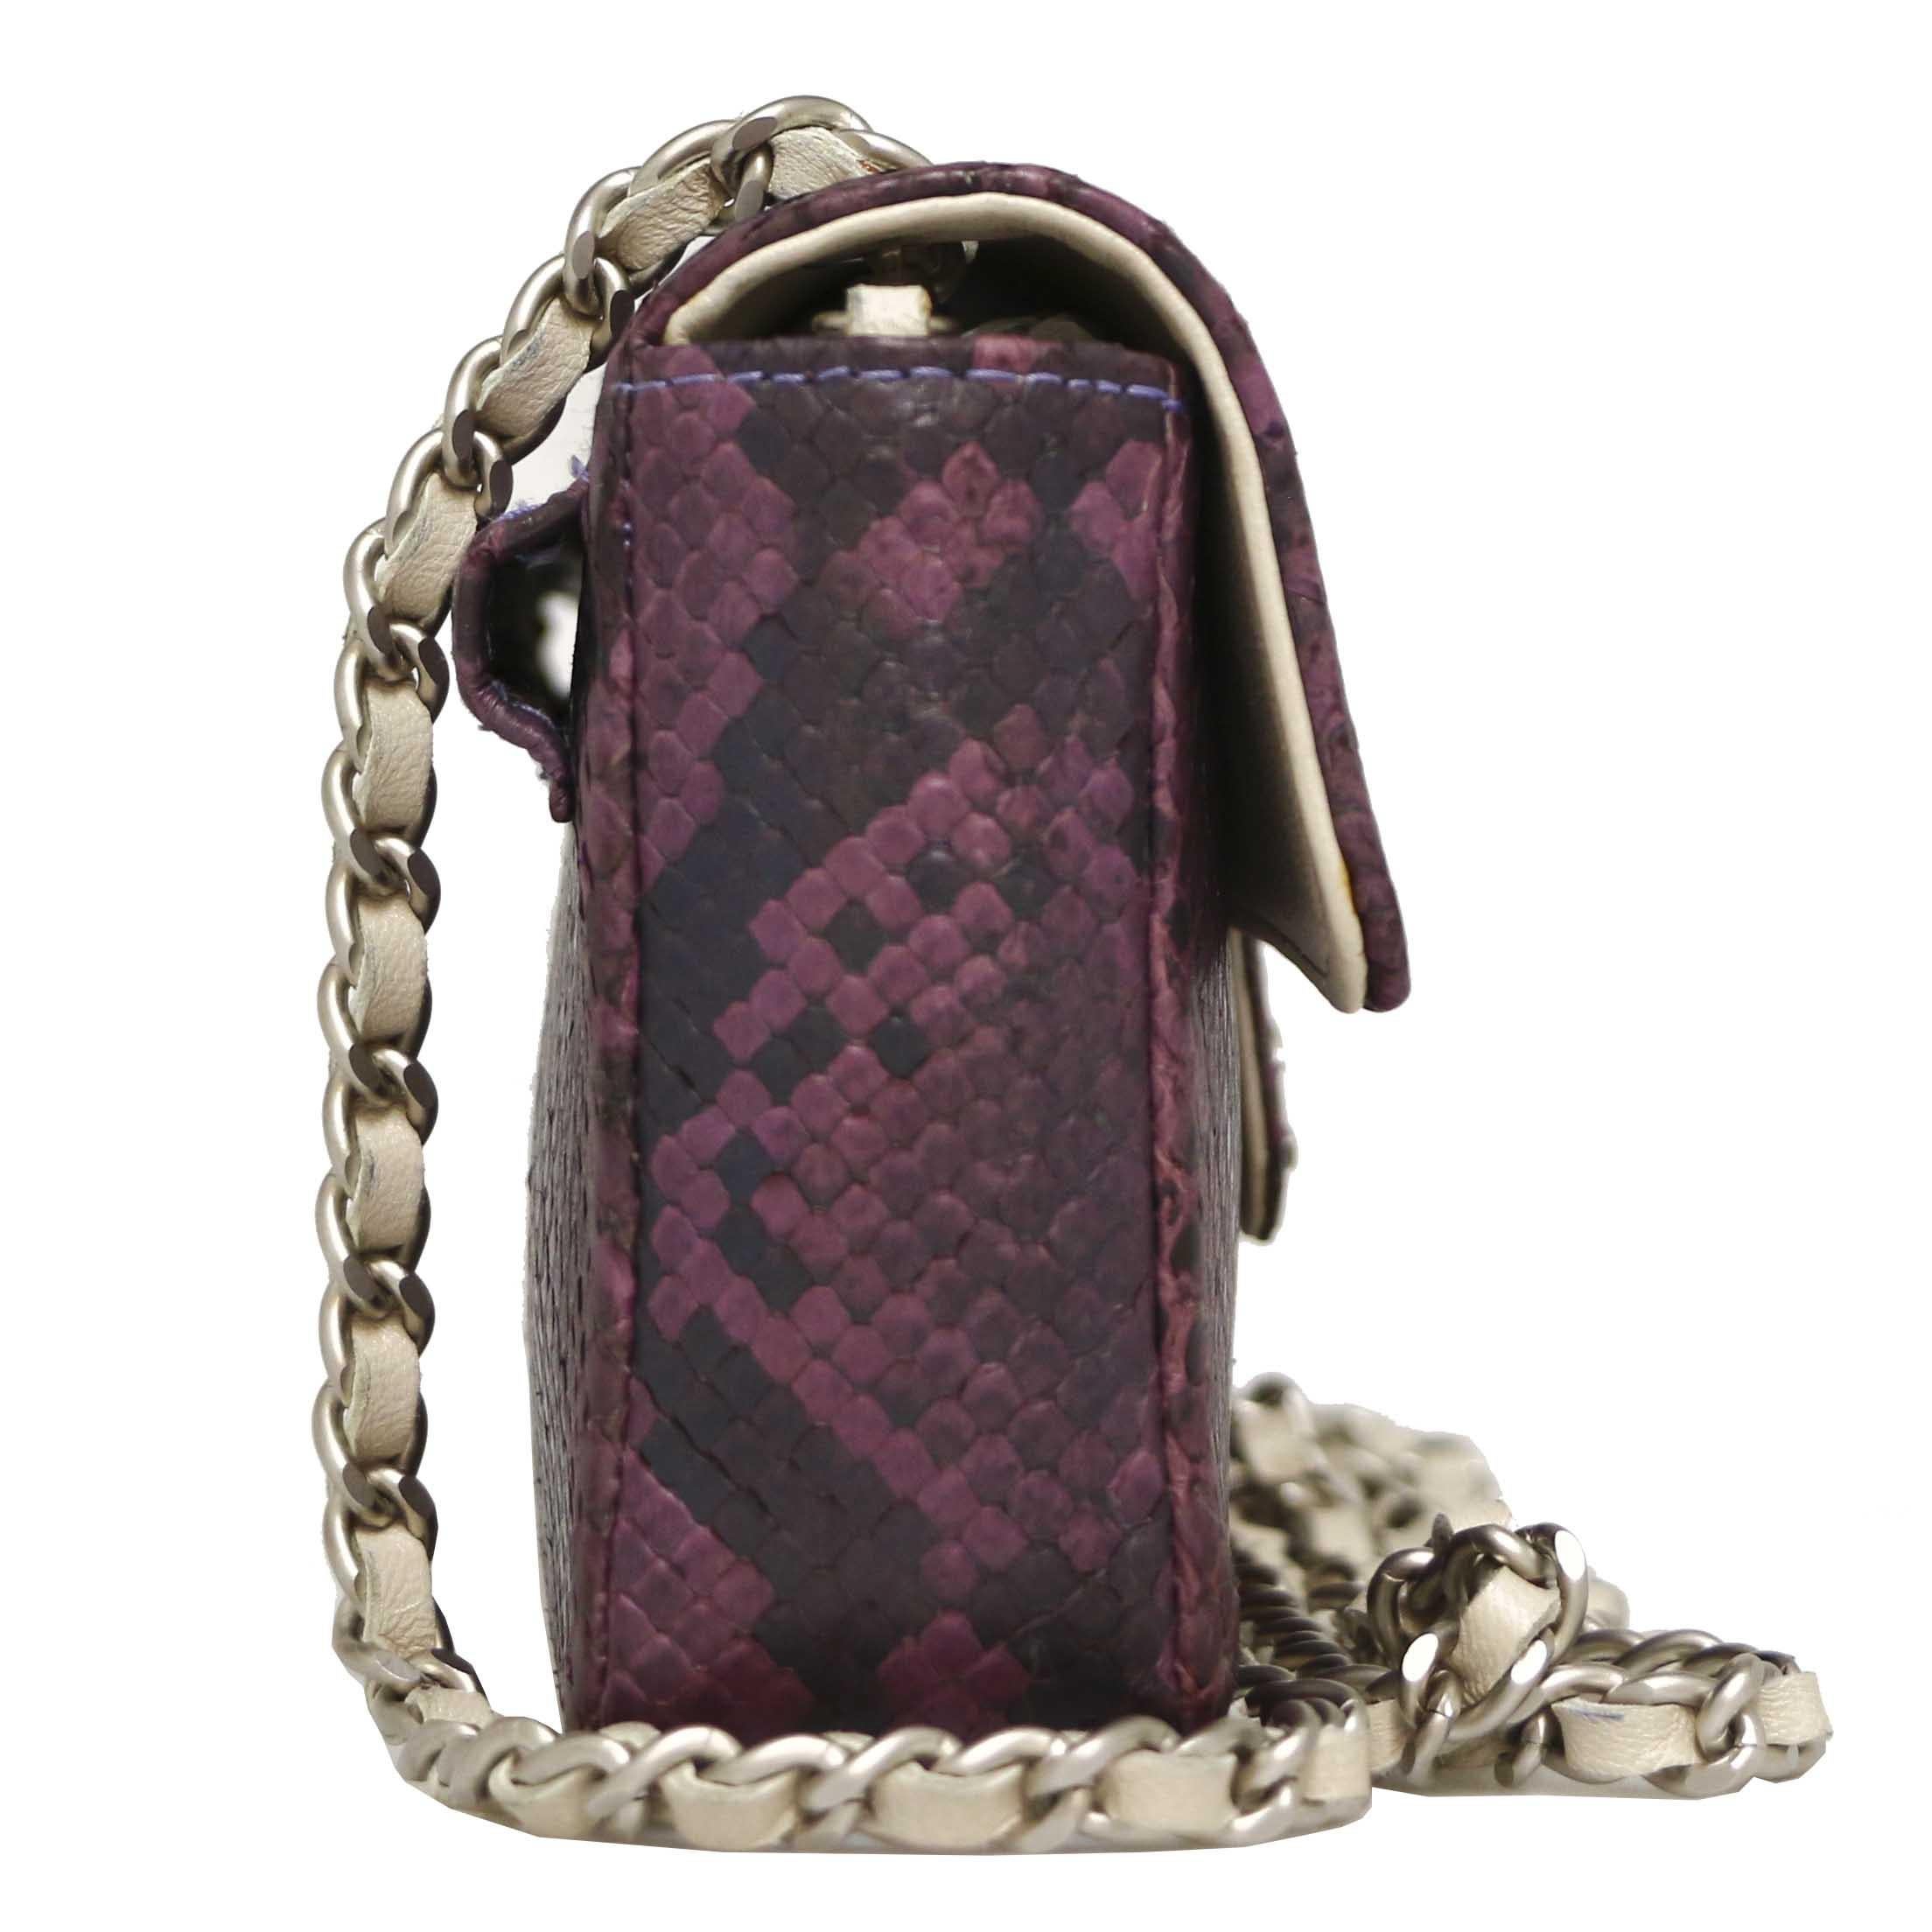 Vintage CHANEL Purple Lizard Mini Belt Bag. The hardware is in matte silver metal.
Worn on the shoulder or crossed.
In very good condition.
Made in Italy.
Serial number: 6119
Dimensions: 15 x 9 x 3.5cm
Chain: 110cm
Will be delivered in a